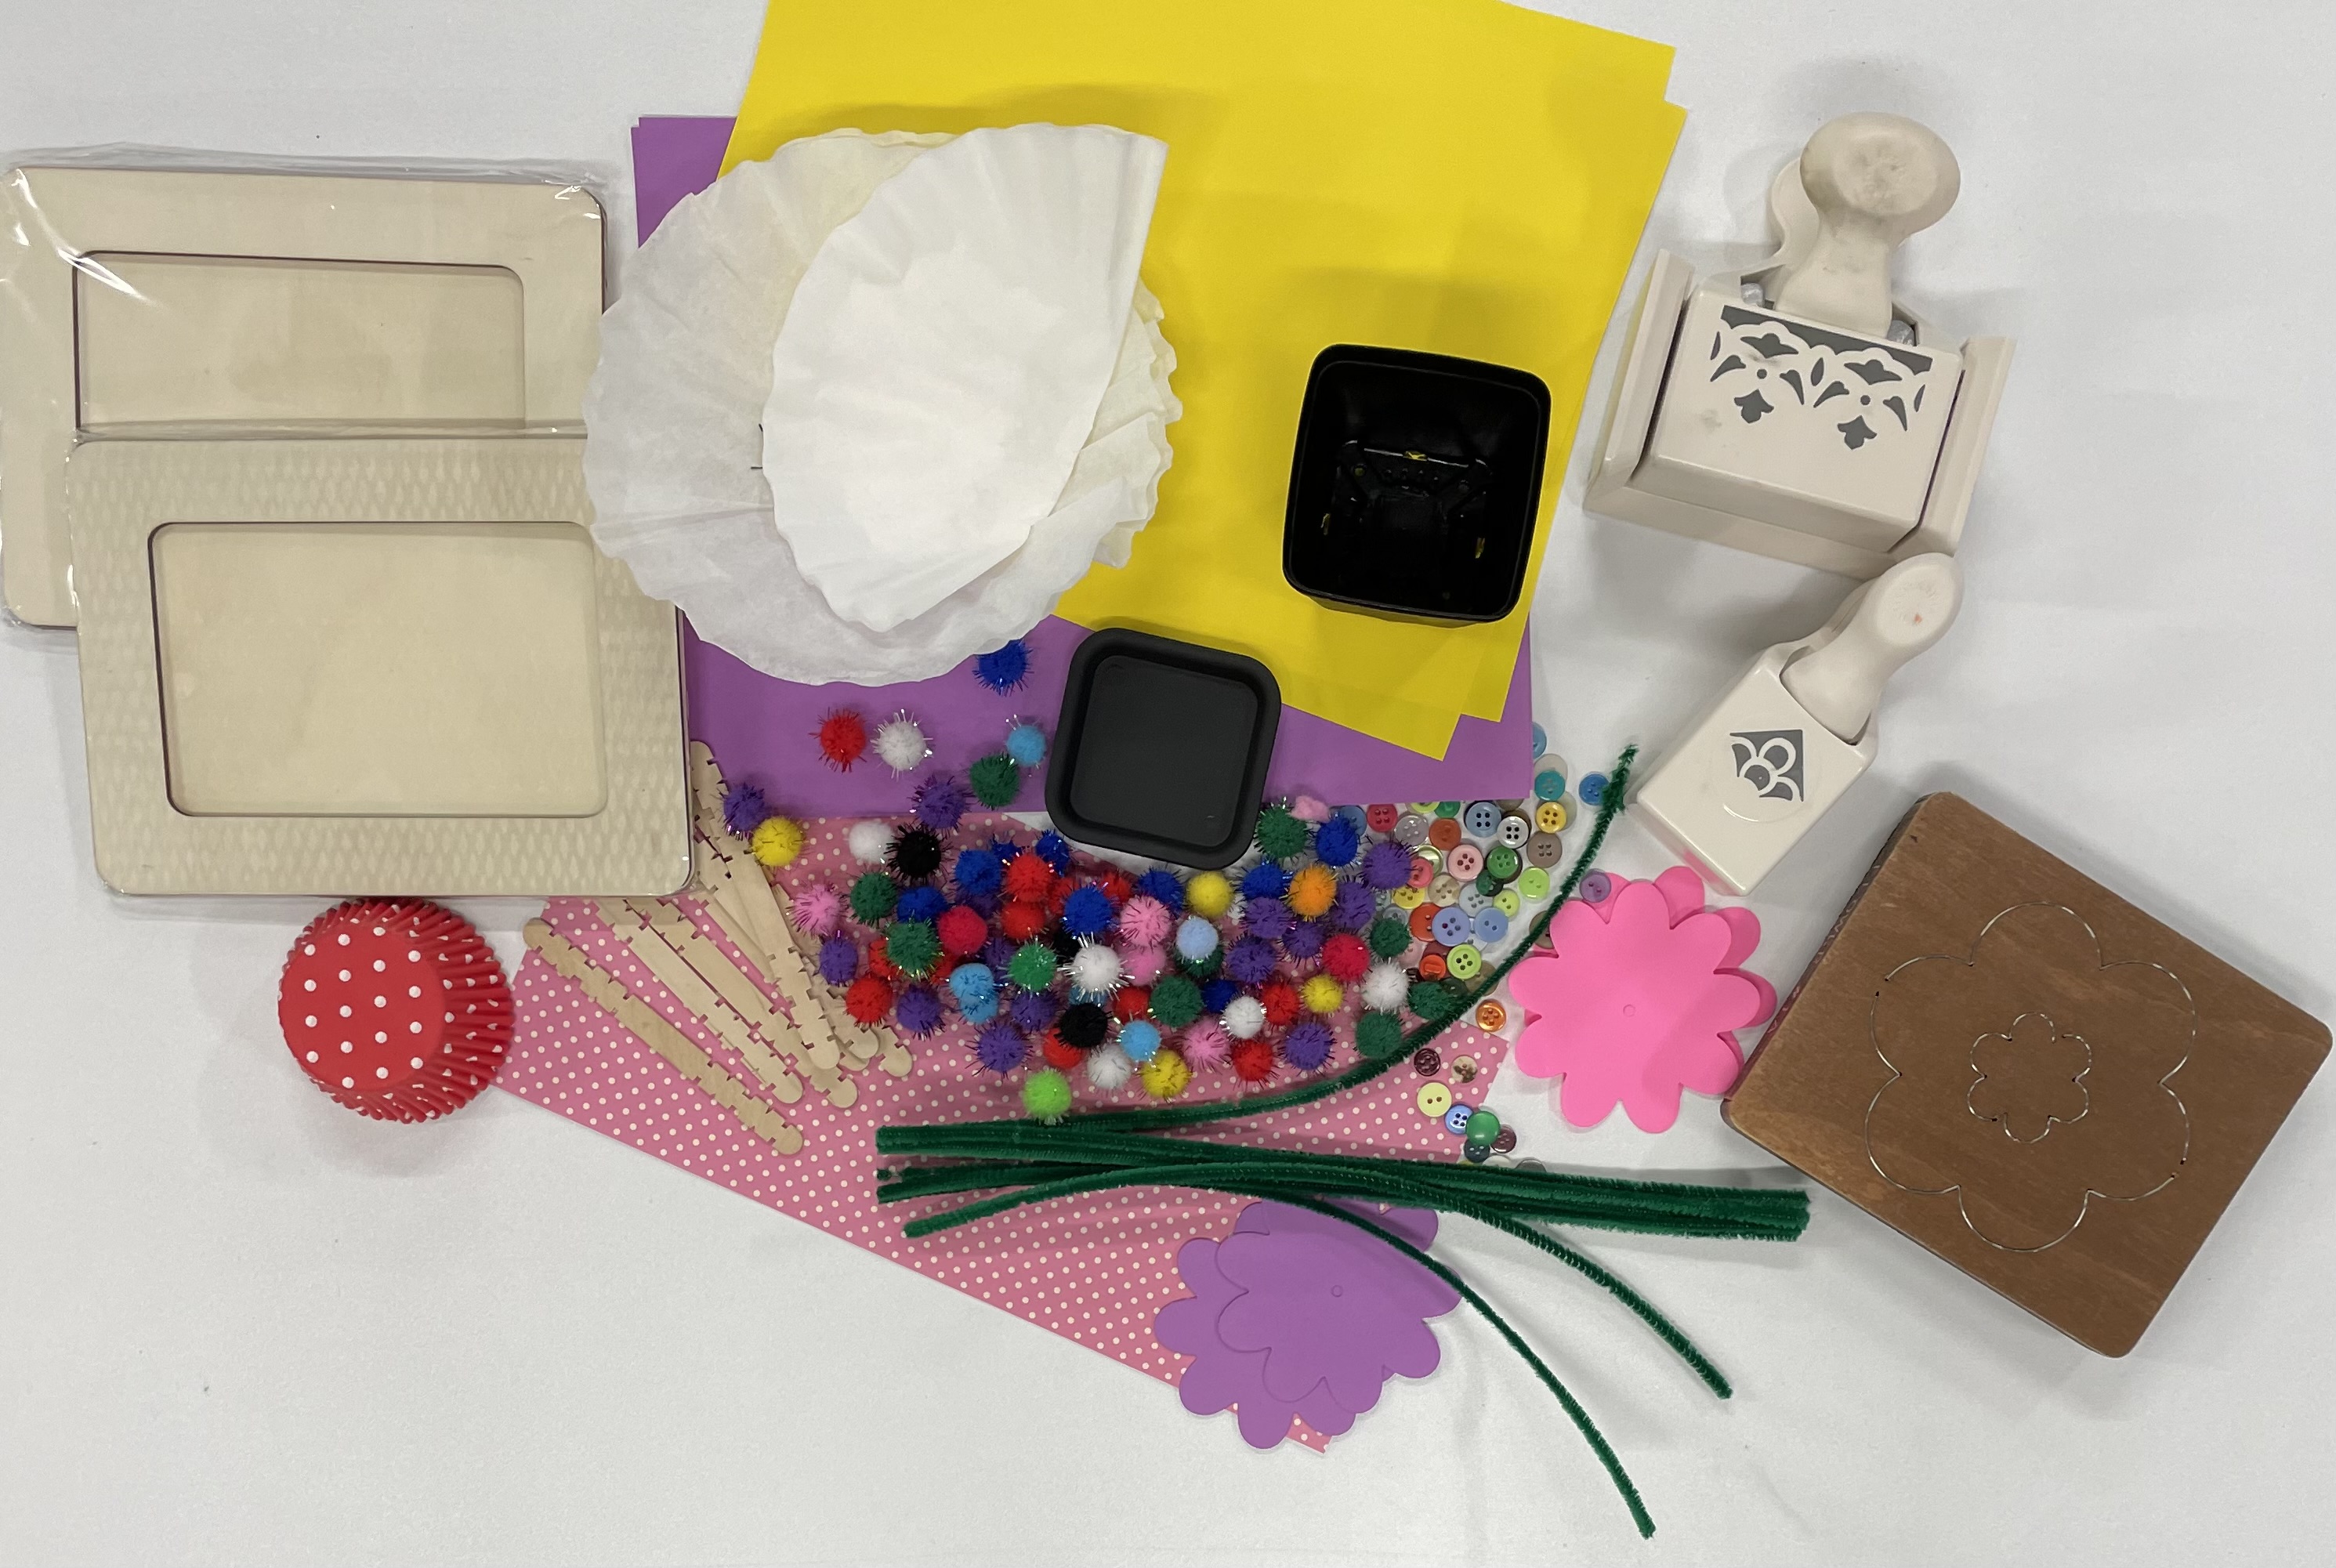 craft supplies - paper, pipe cleaners, pom poms, paper flowers, hole punches